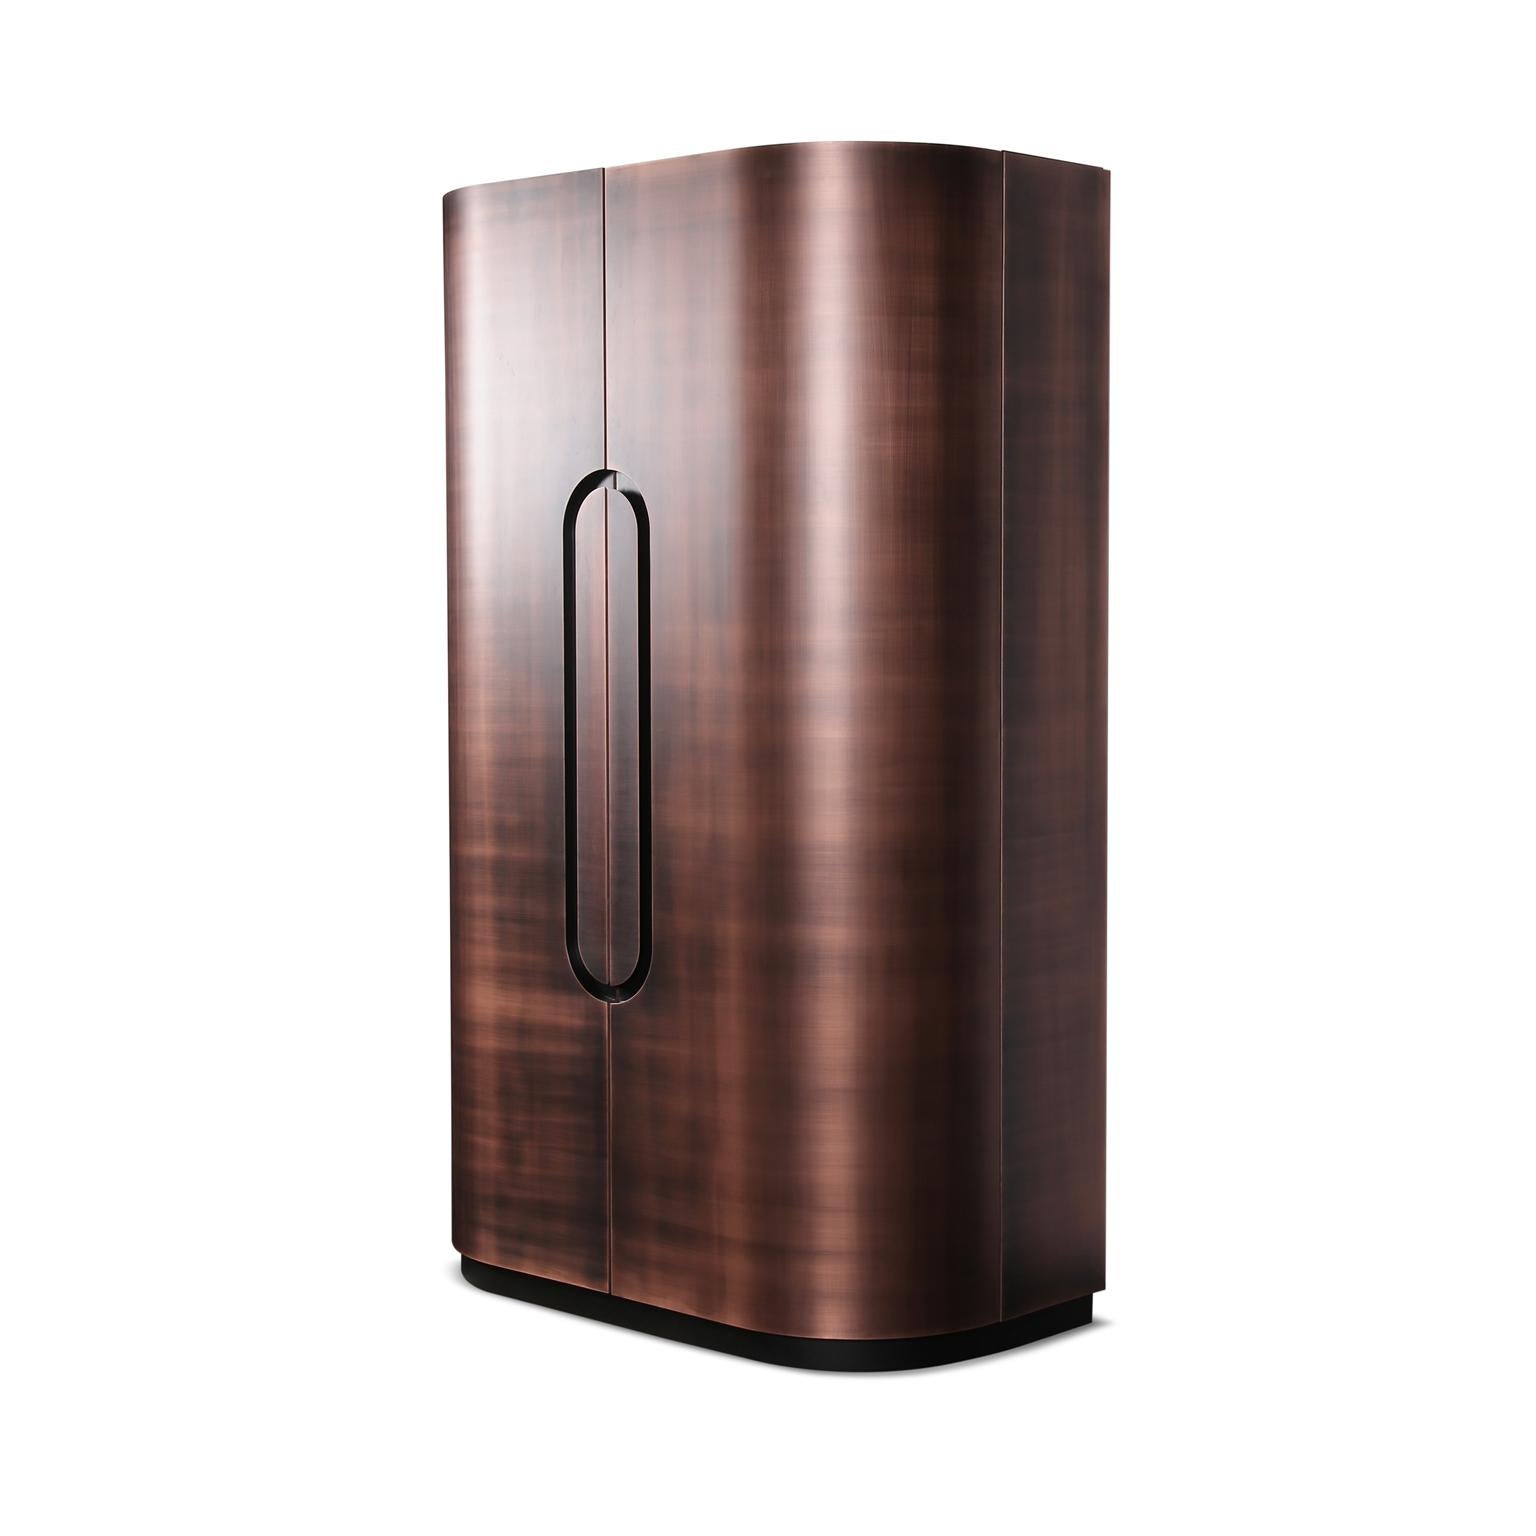 Exquisite custom bar cabinet, a true masterpiece that seamlessly blends sophistication and functionality. Immerse yourself in luxury with the darkened bronze metal finish that envelopes the exterior, creating a captivating aura of opulence. The